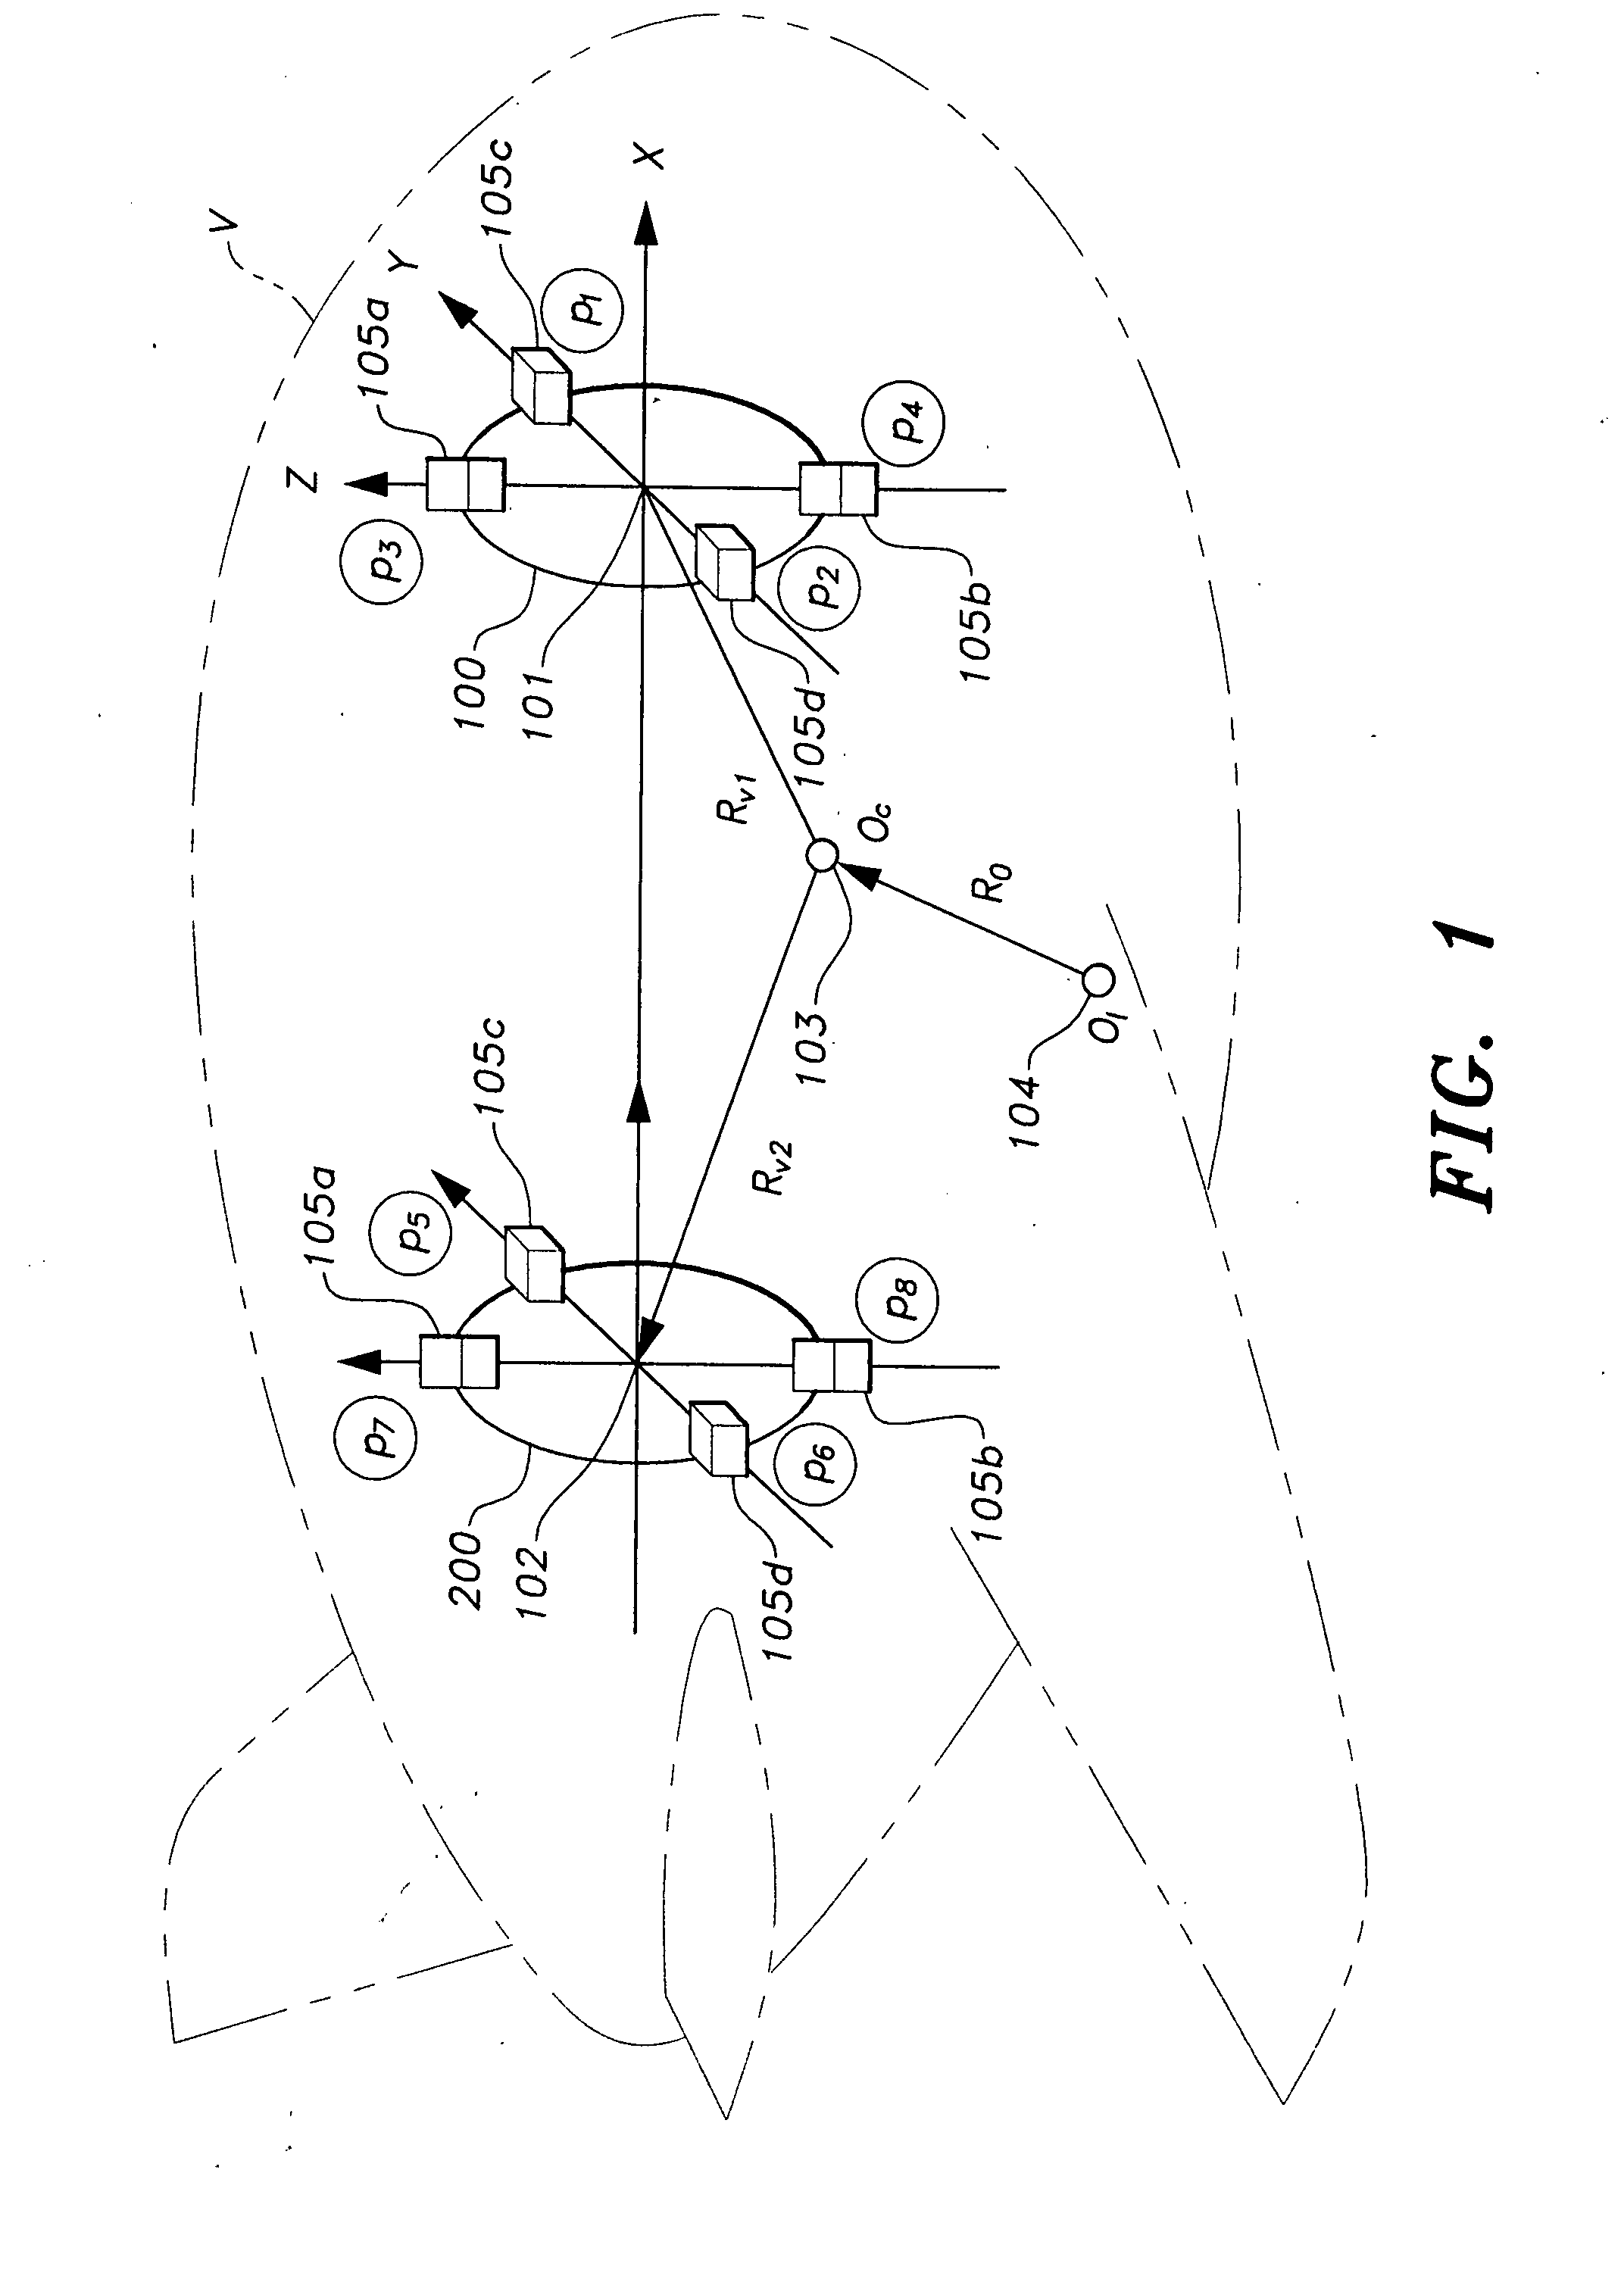 Method and apparatus for tracking center of gravity of air vehicle